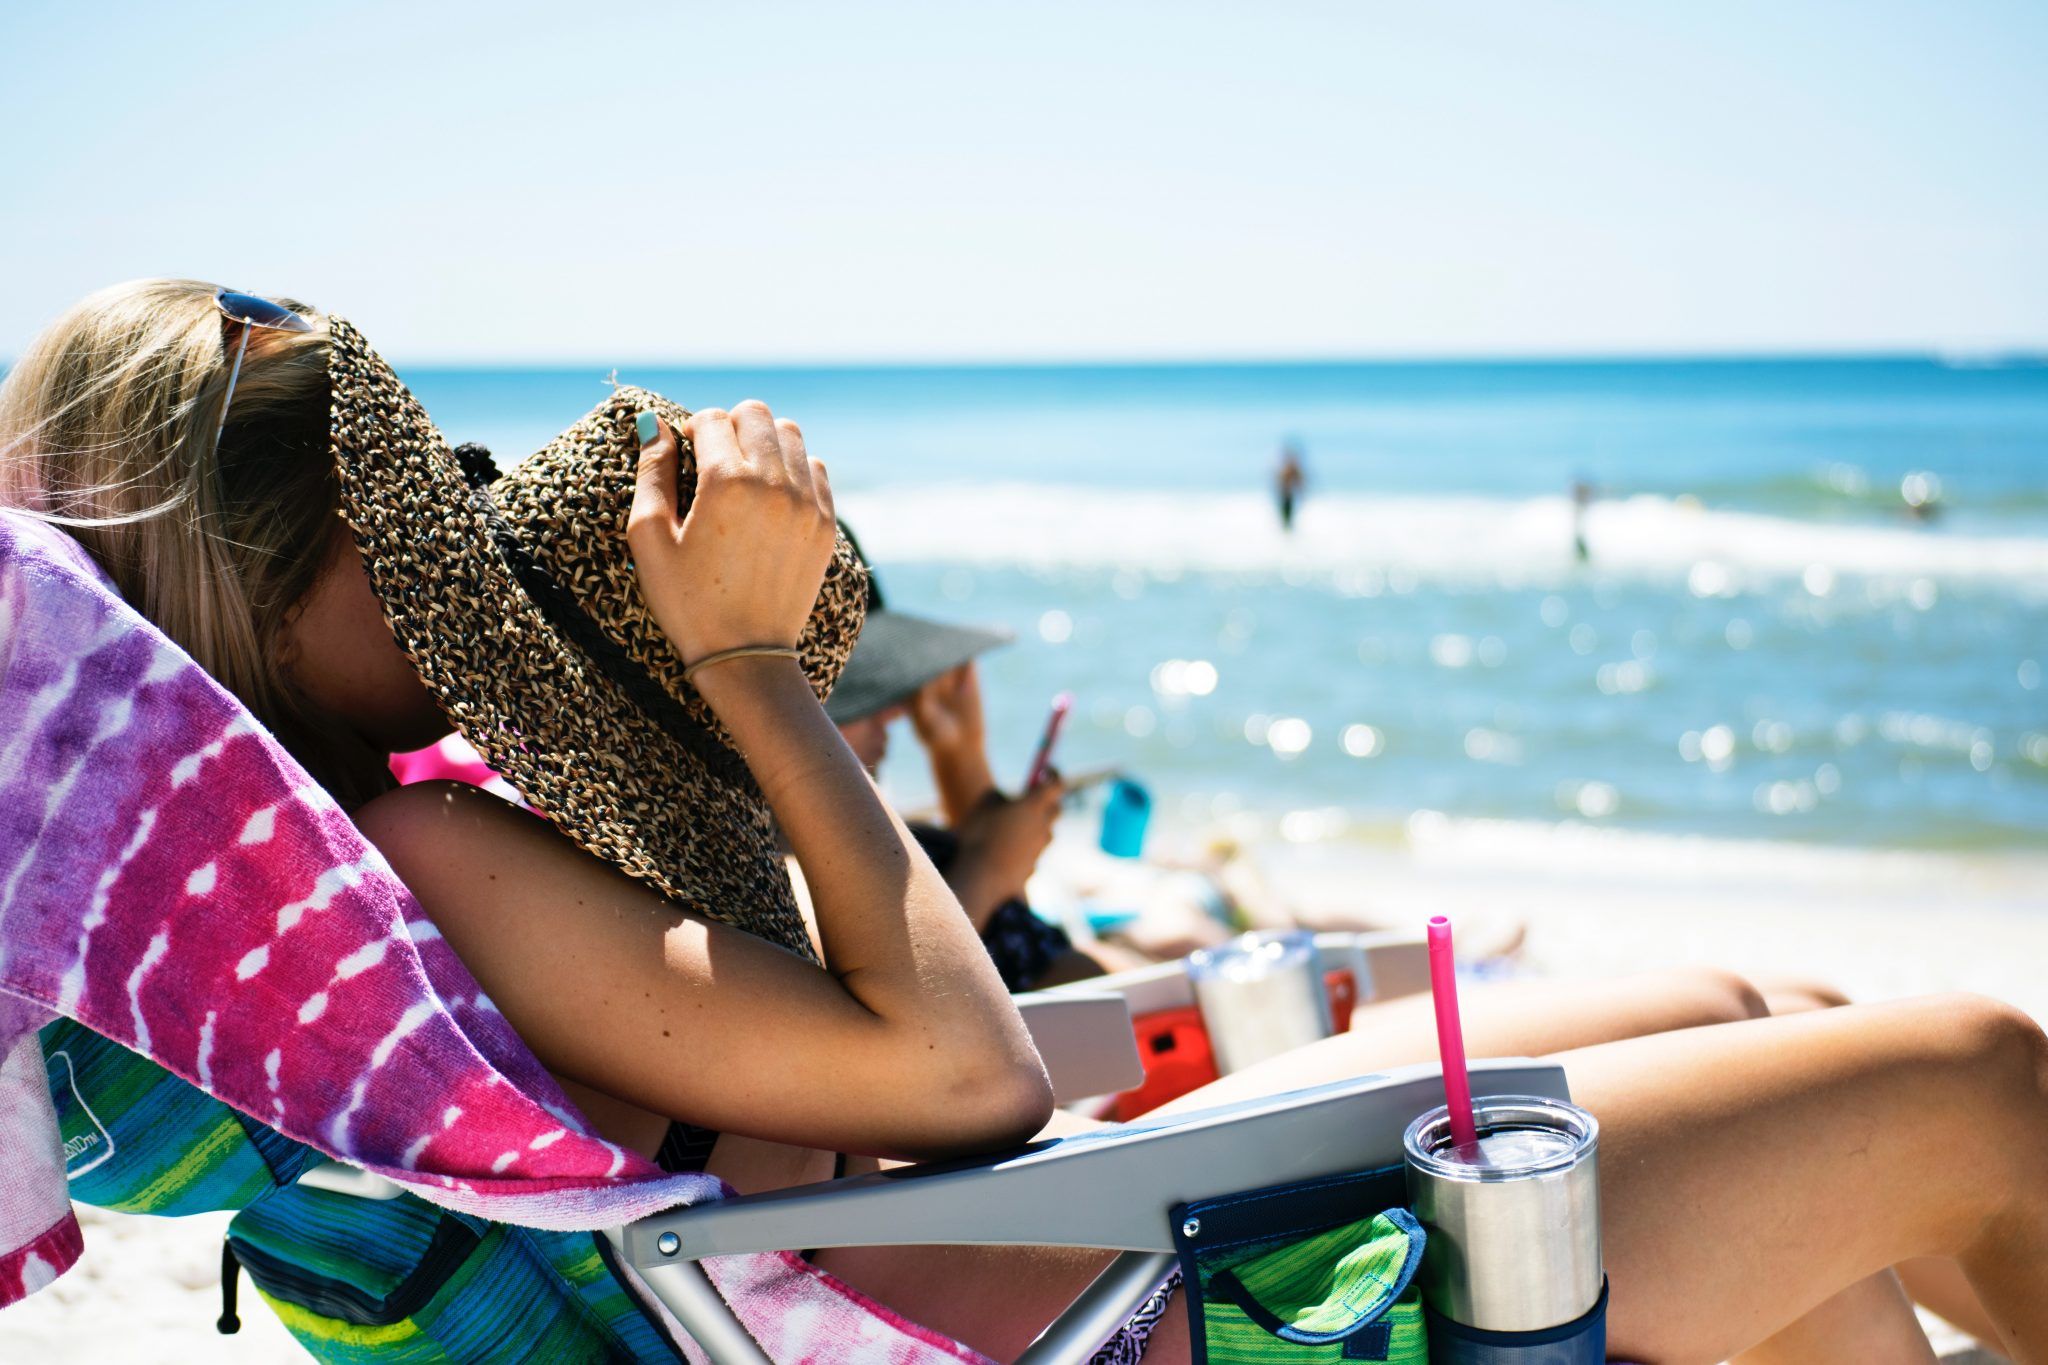 Summer Hair Dos and Don'ts. Learn more about what you should do with your hair in the summer